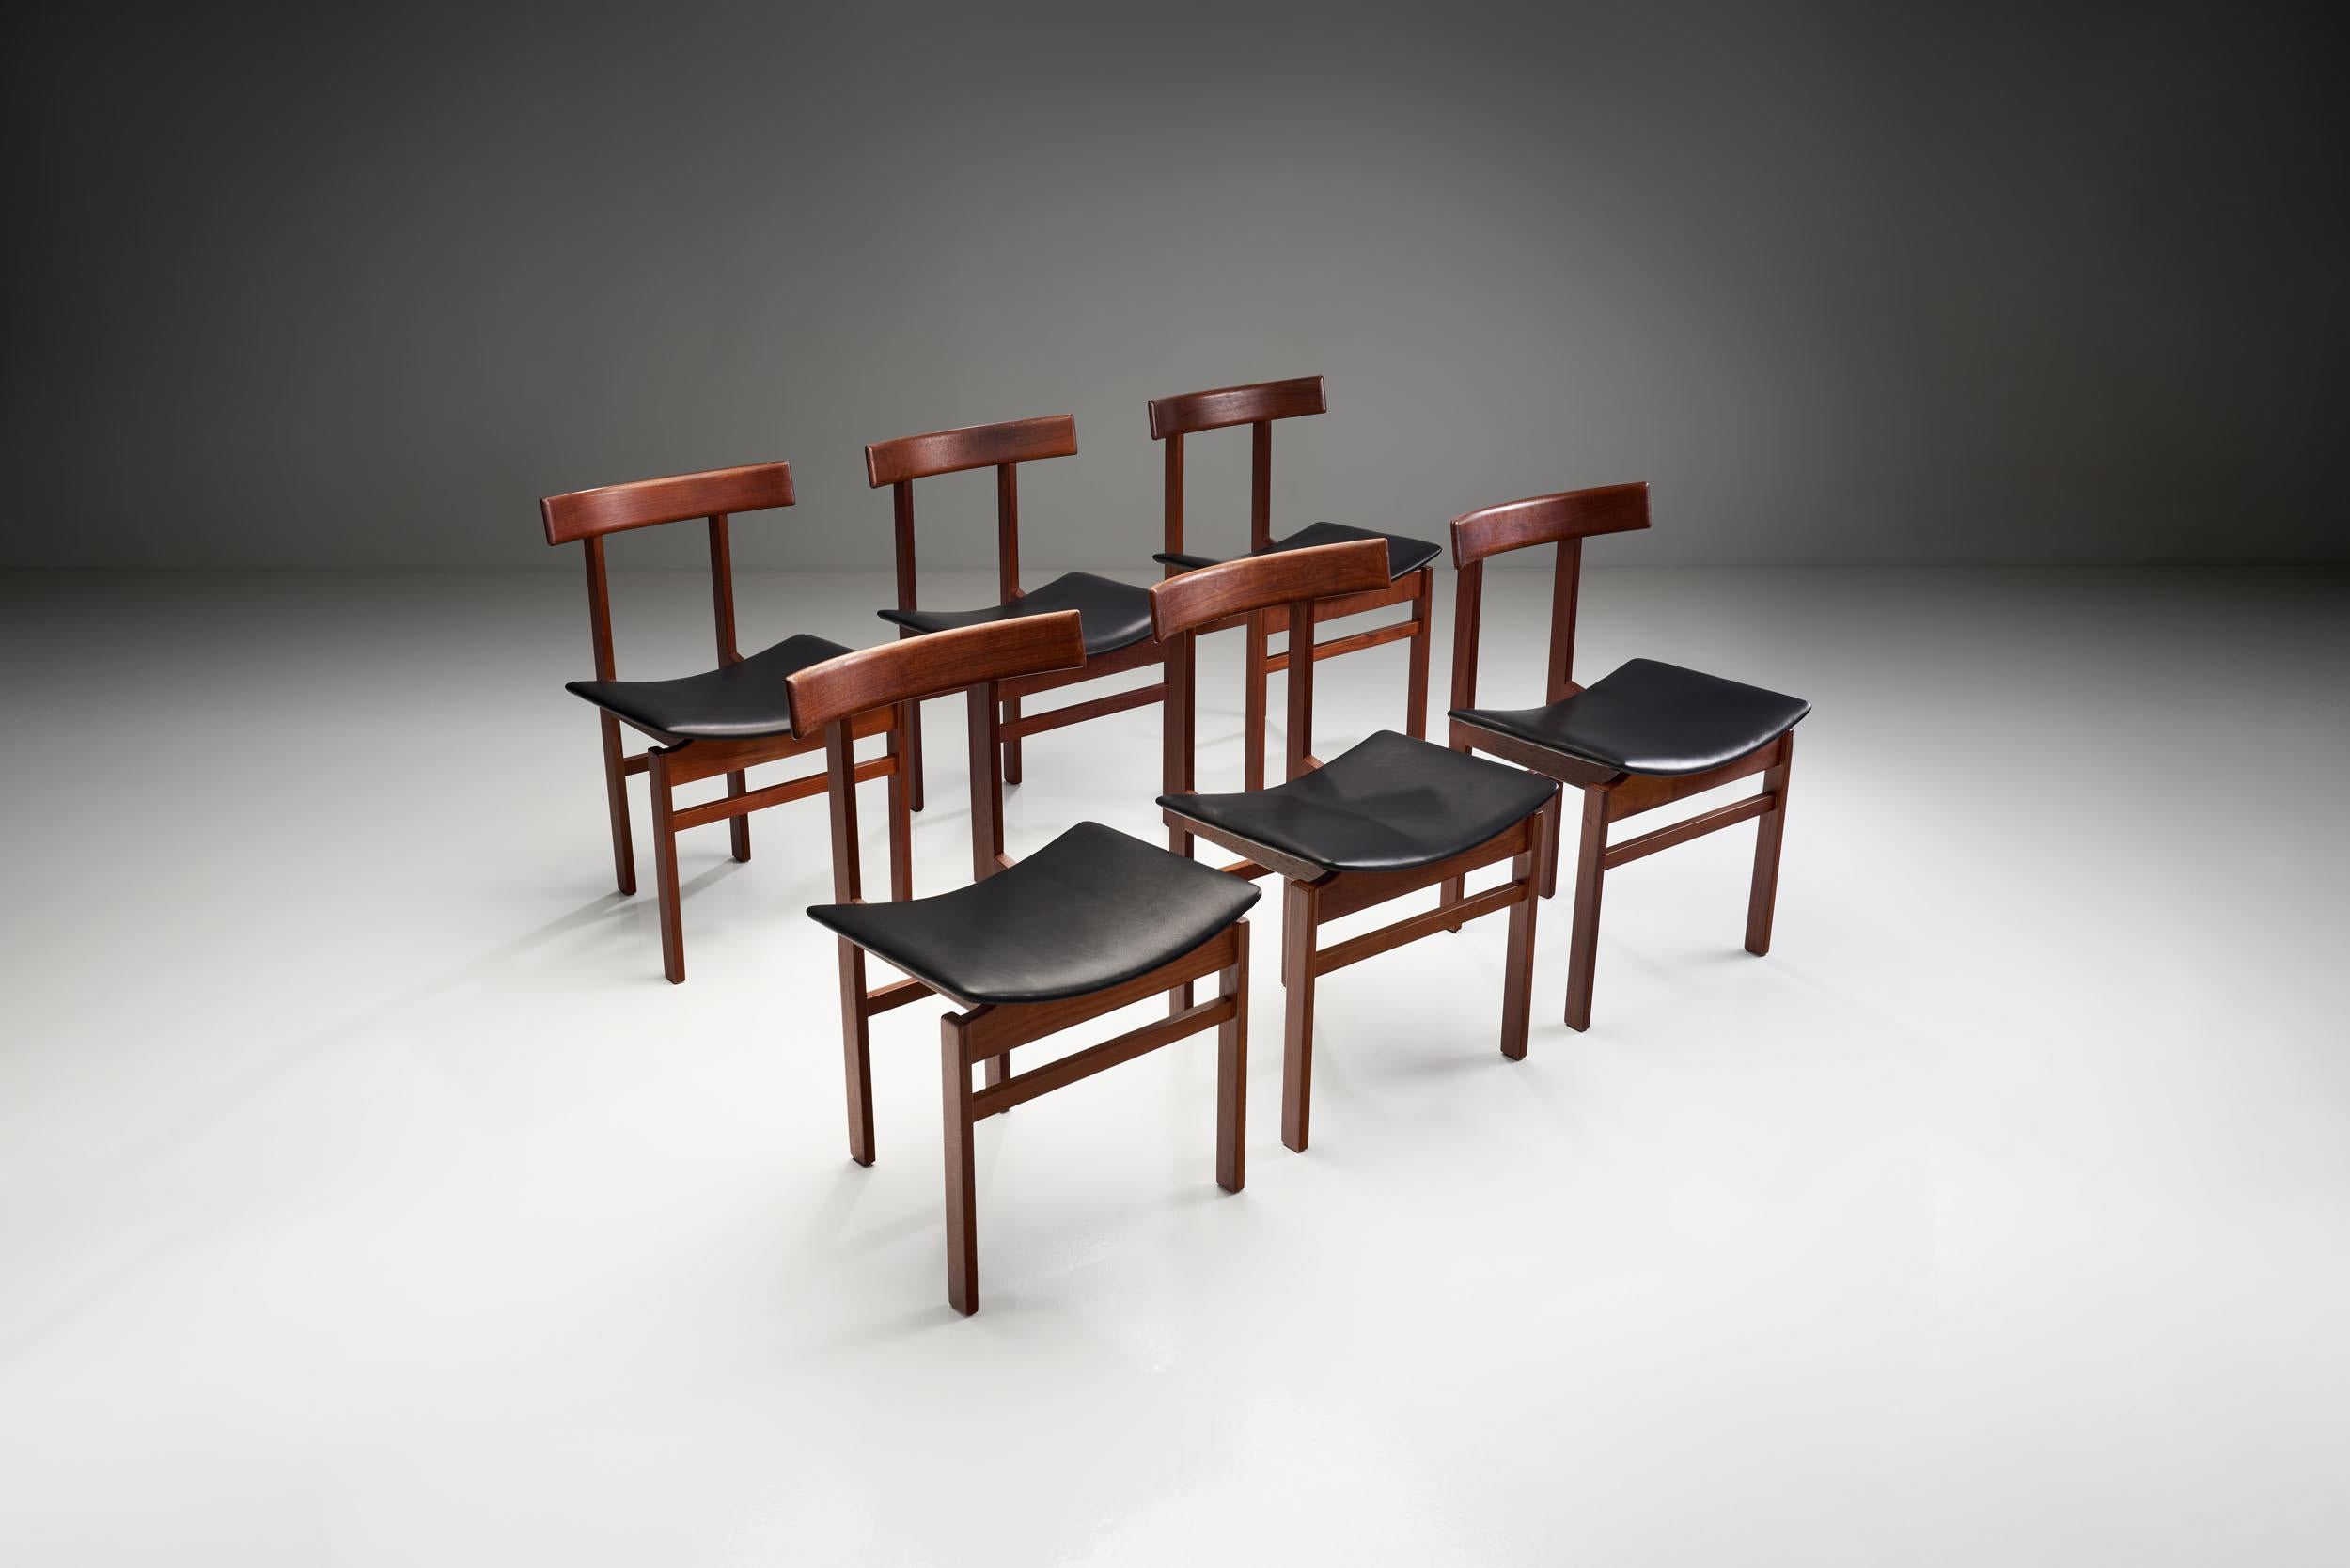 This fantastic set of 6 teak dining chairs in the Danish Modern style was designed by Inger Klingenberg for France and Son. The chairs feature a striking sculptural design and solid teak construction. 

The standout characteristic of these chairs